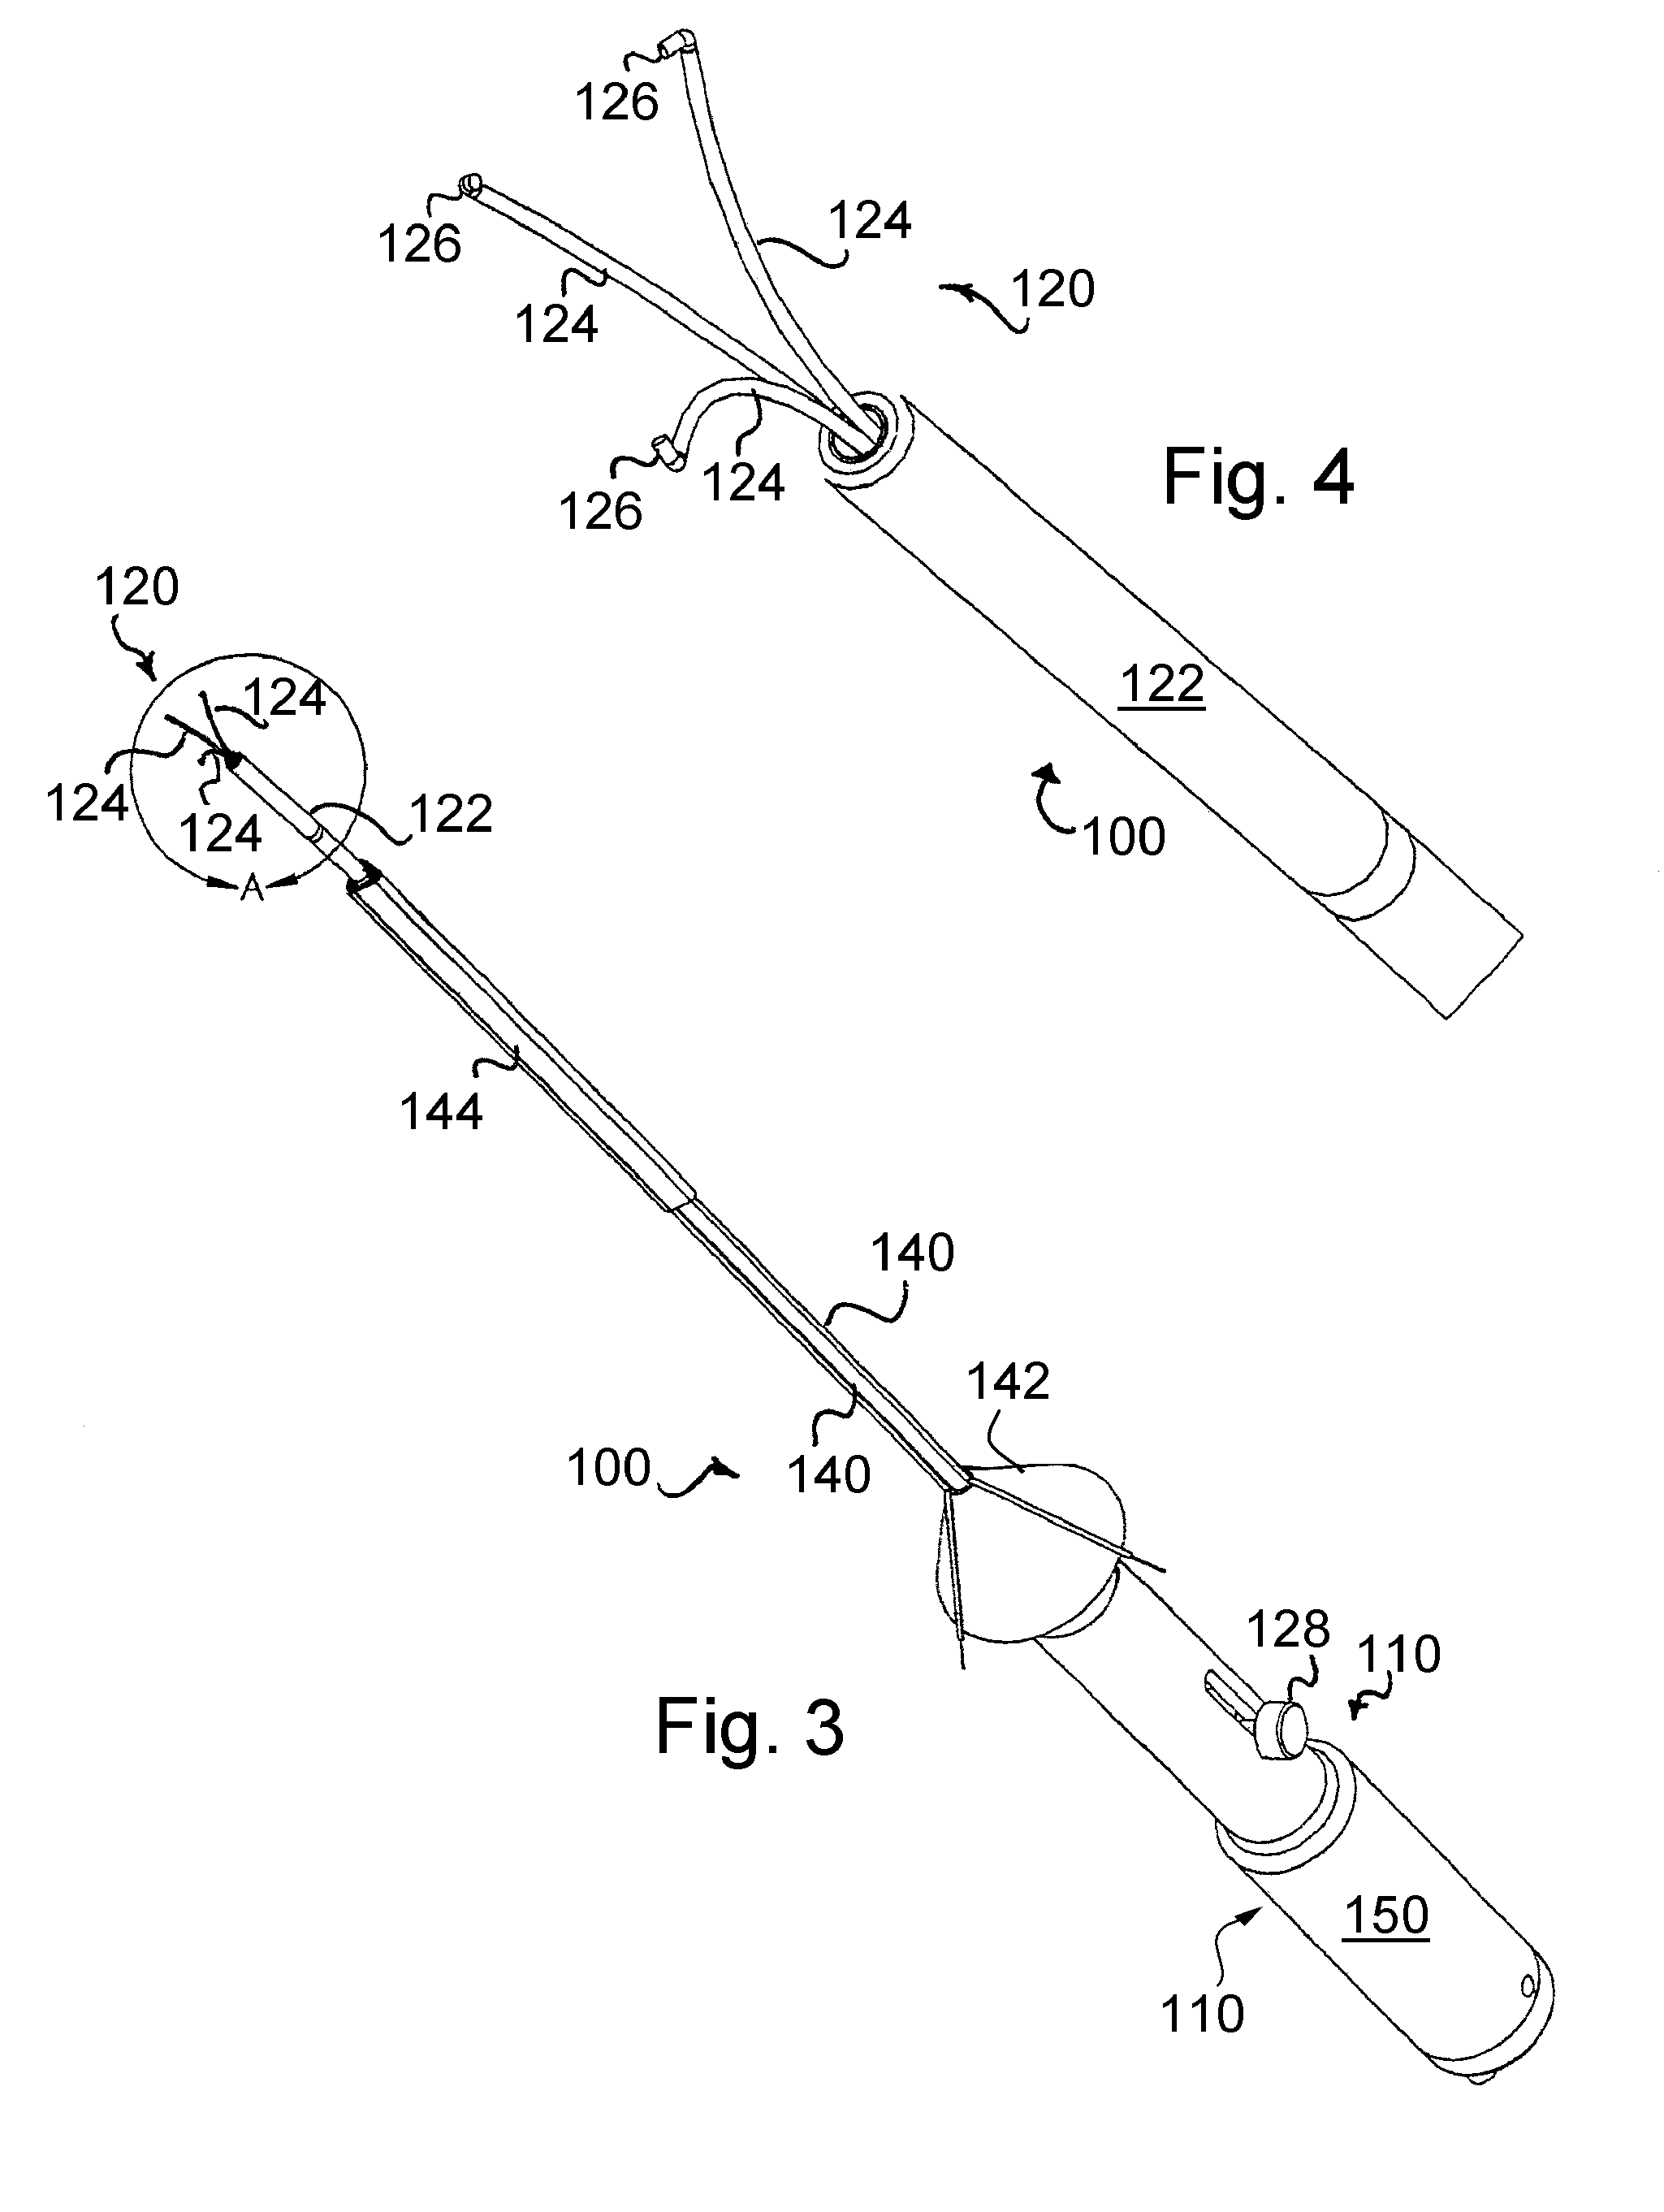 Integrated medical apparatus for non-traumatic grasping, manipulating and closure of tissue